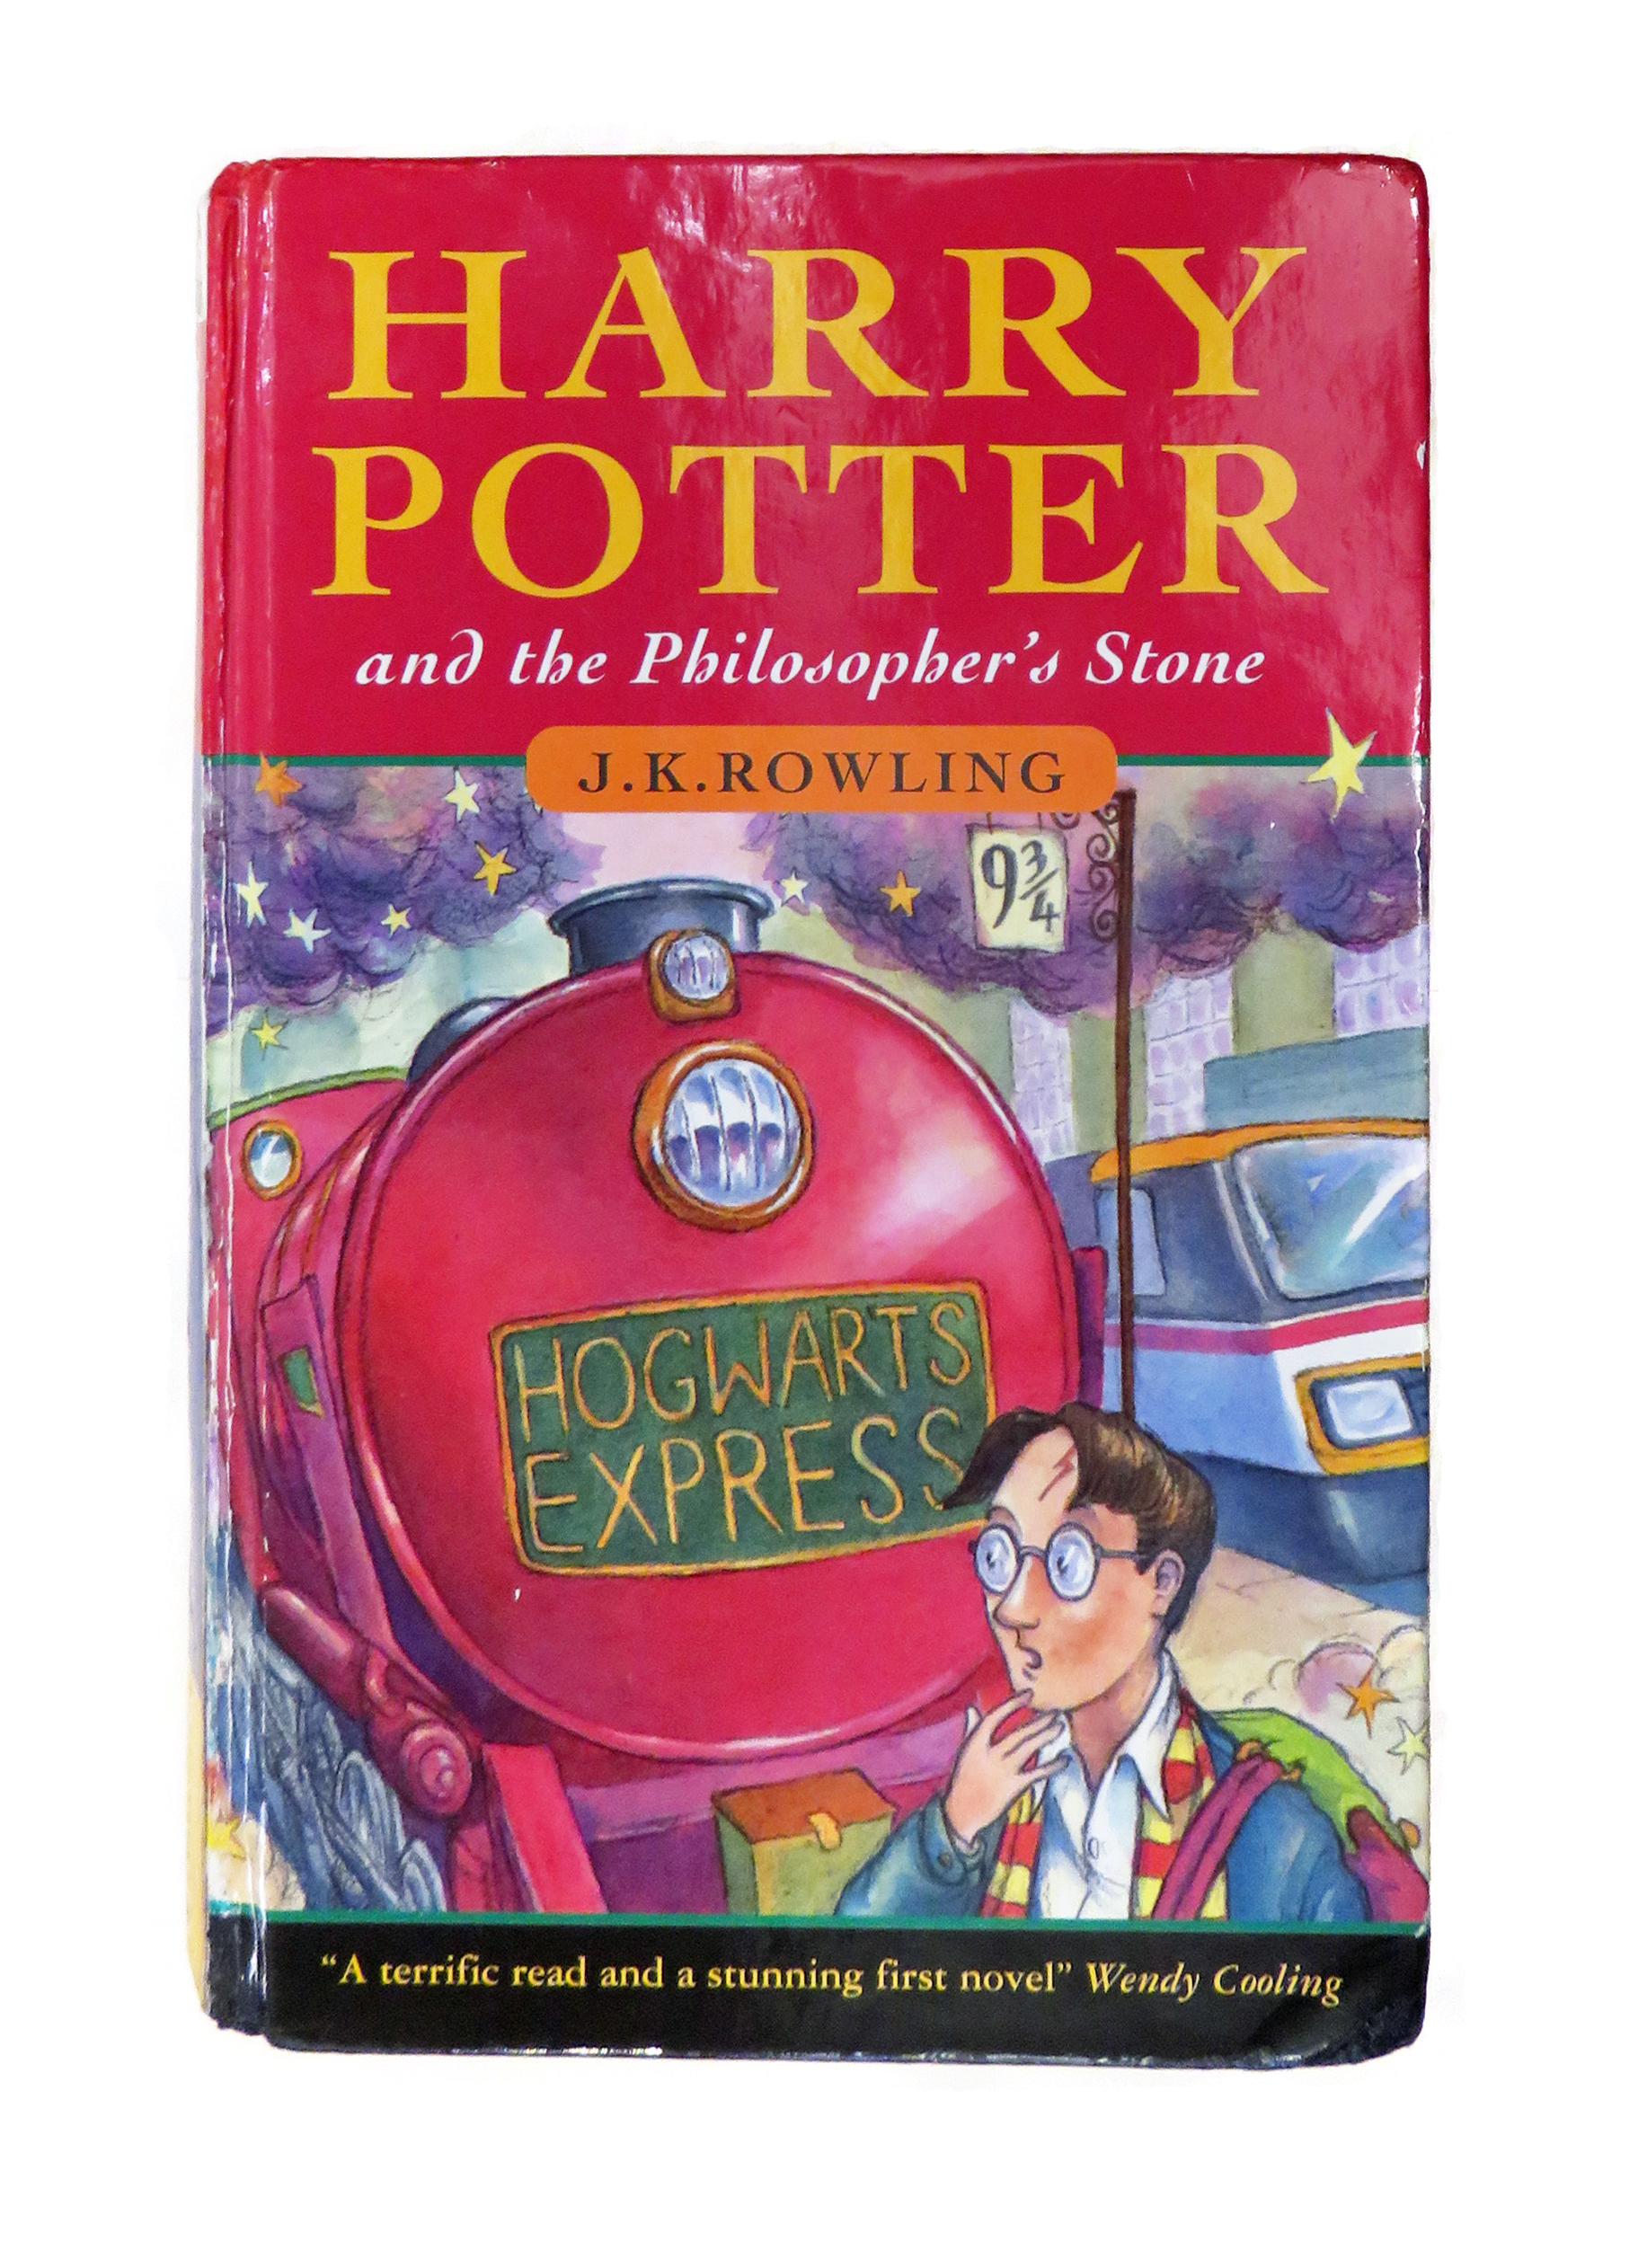 Harry Potter and the Philosopher's Stone true first edition hardback